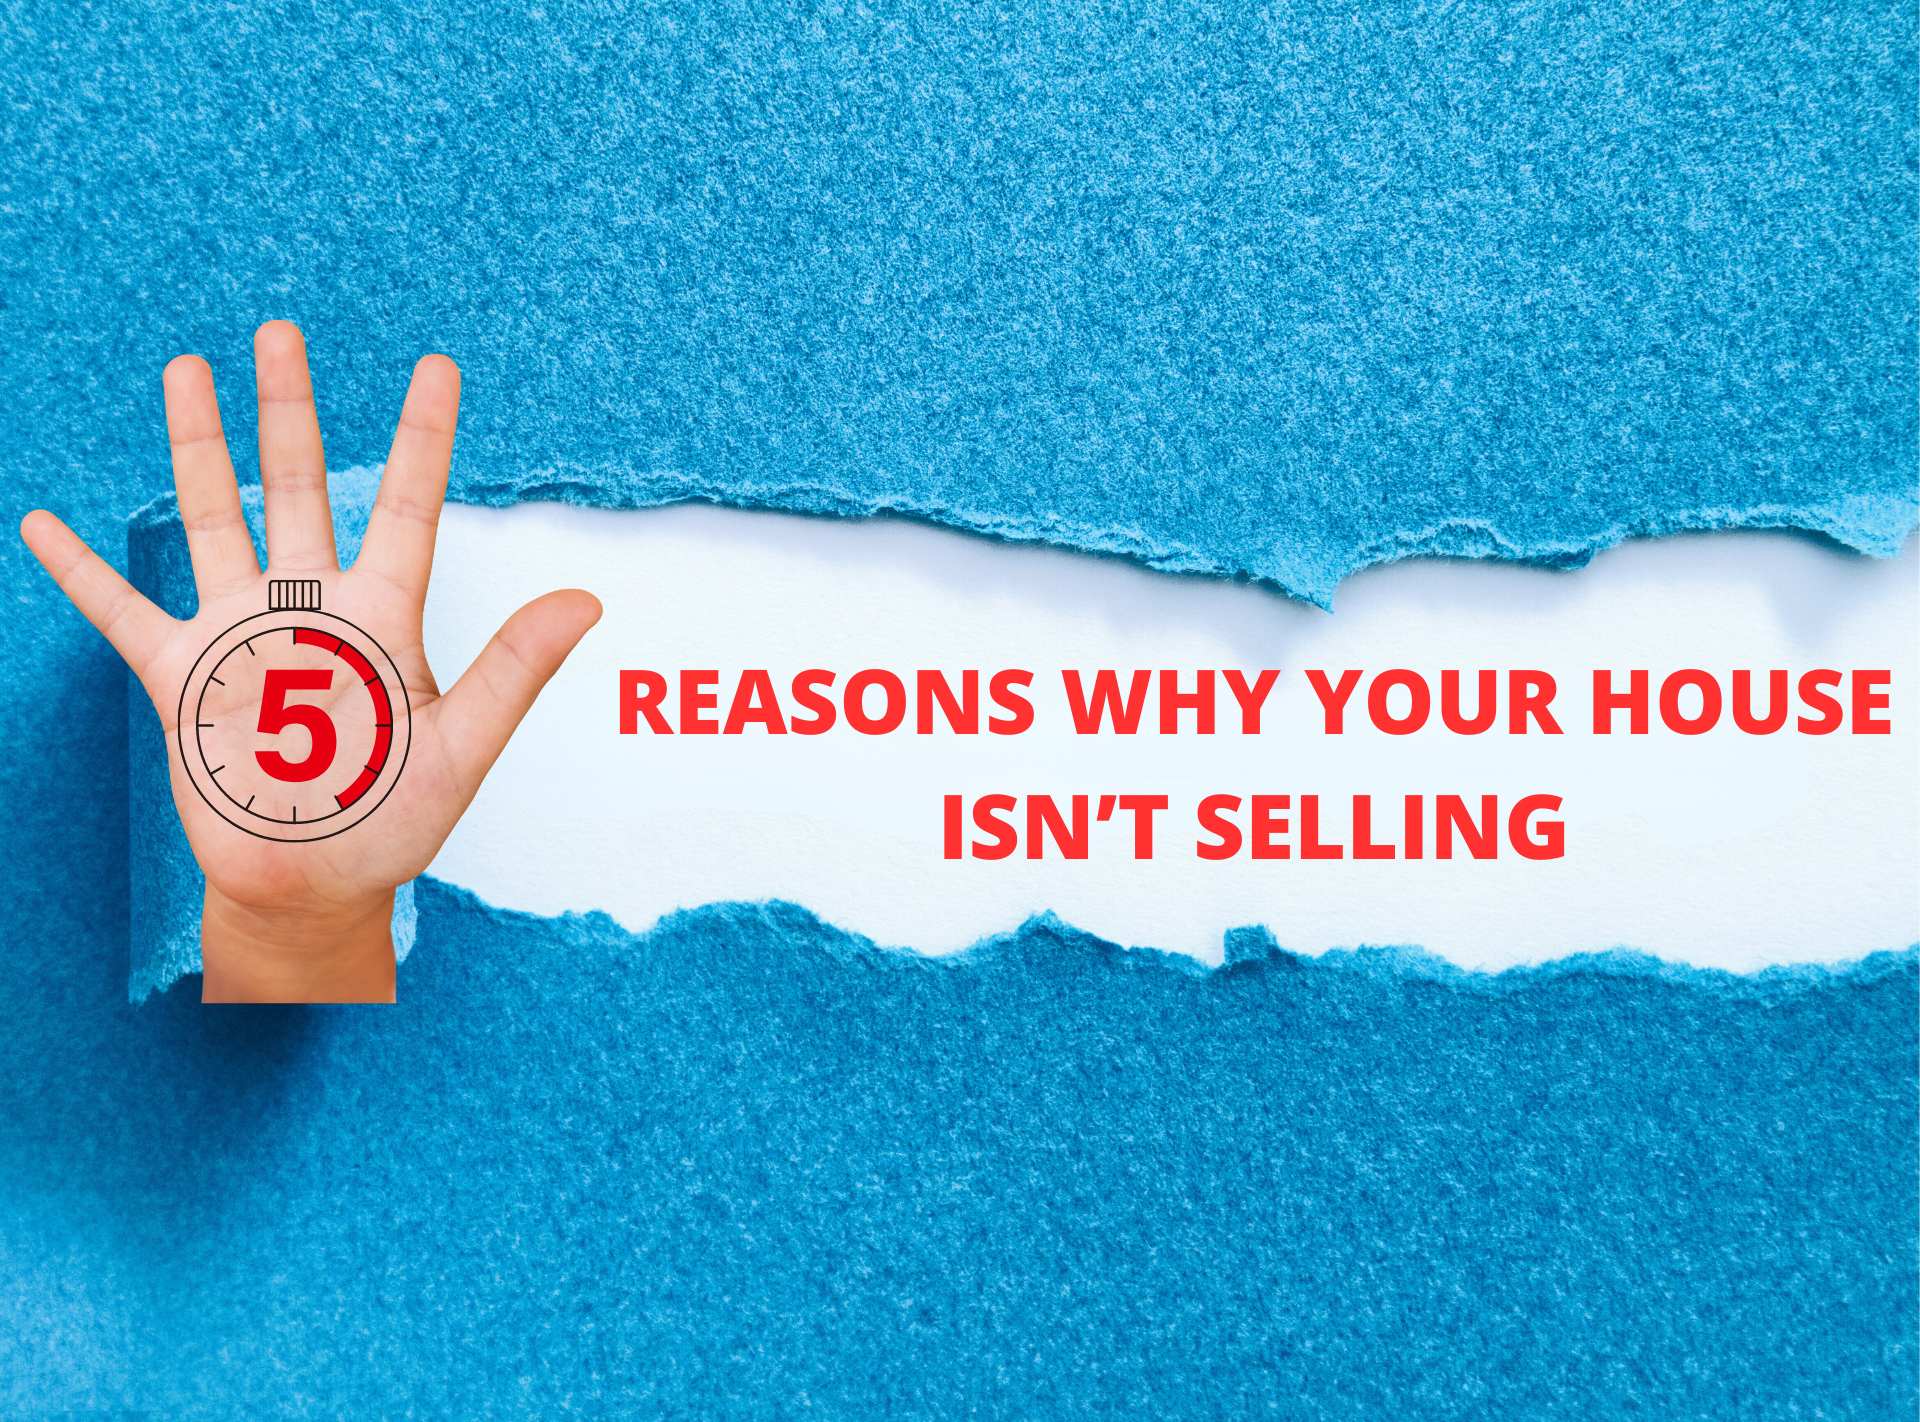 5 reasons why your house isn't selling